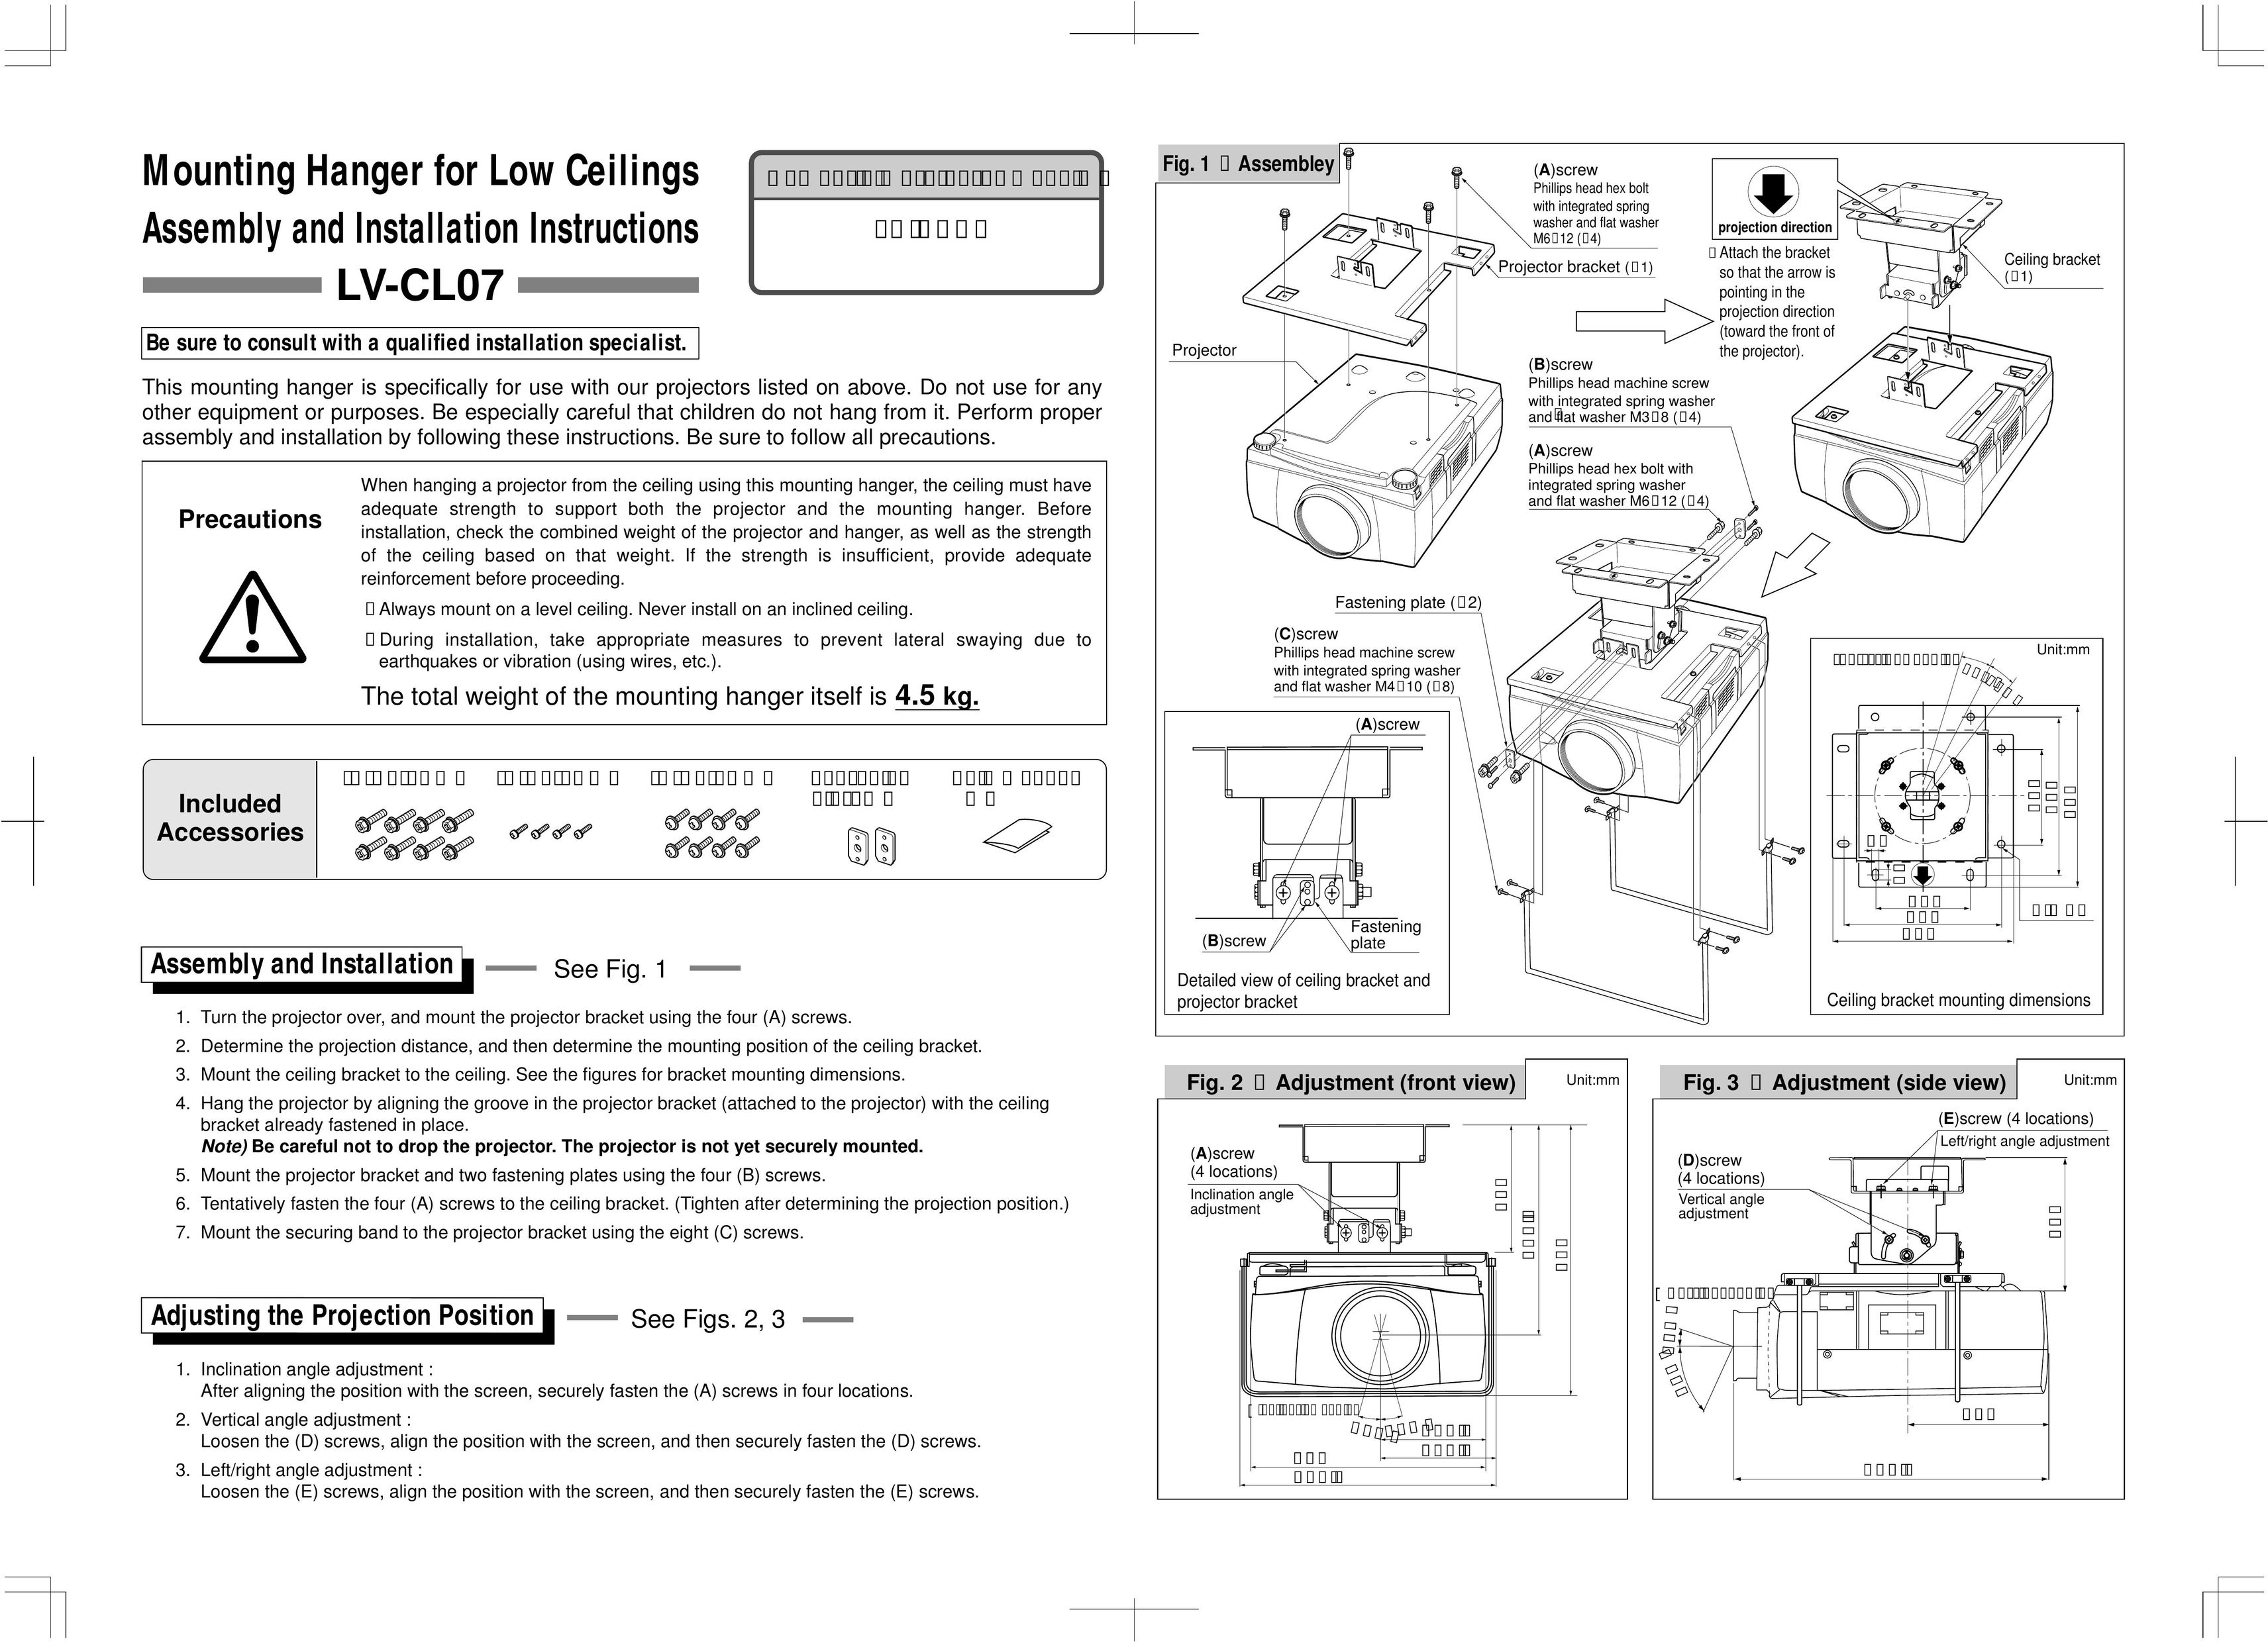 Canon LV-CL07 Indoor Furnishings User Manual